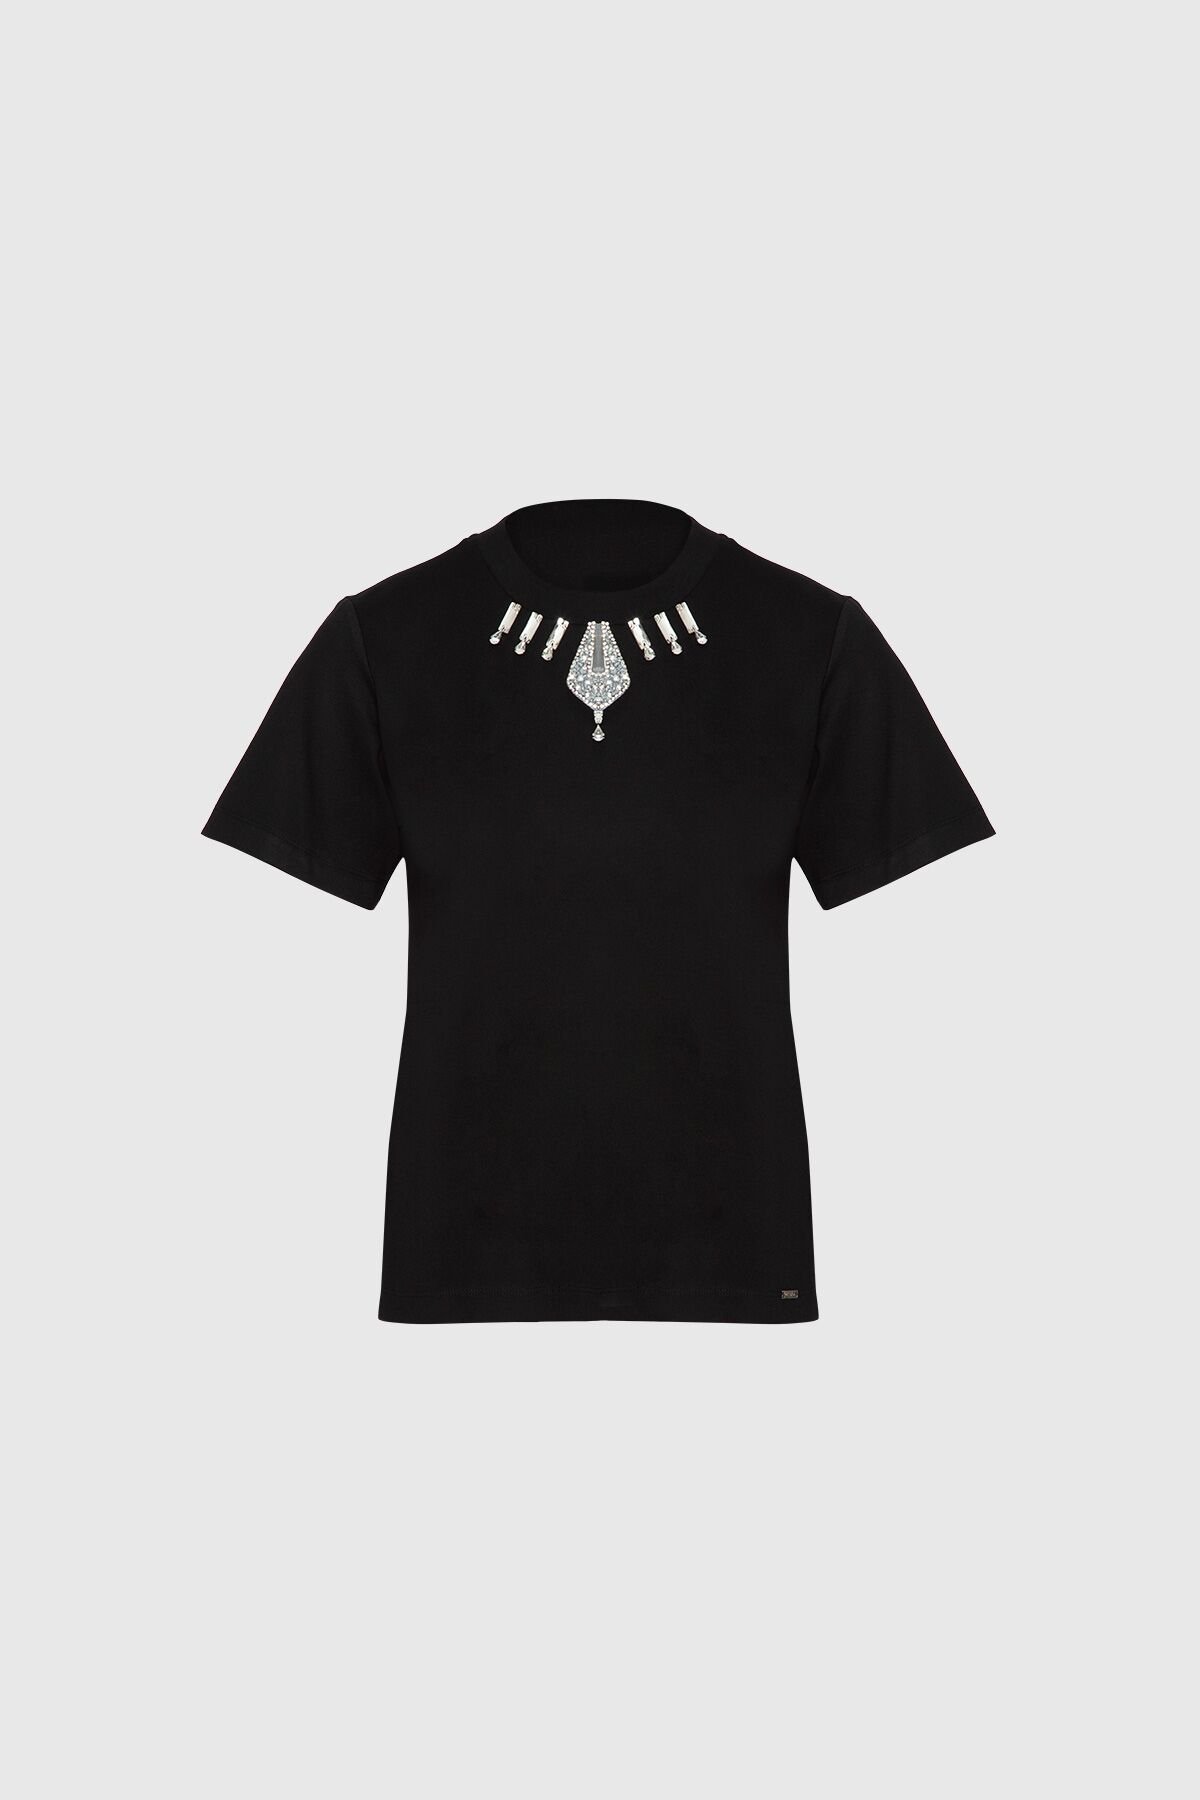 Collar Embroidered Black T-Shirt